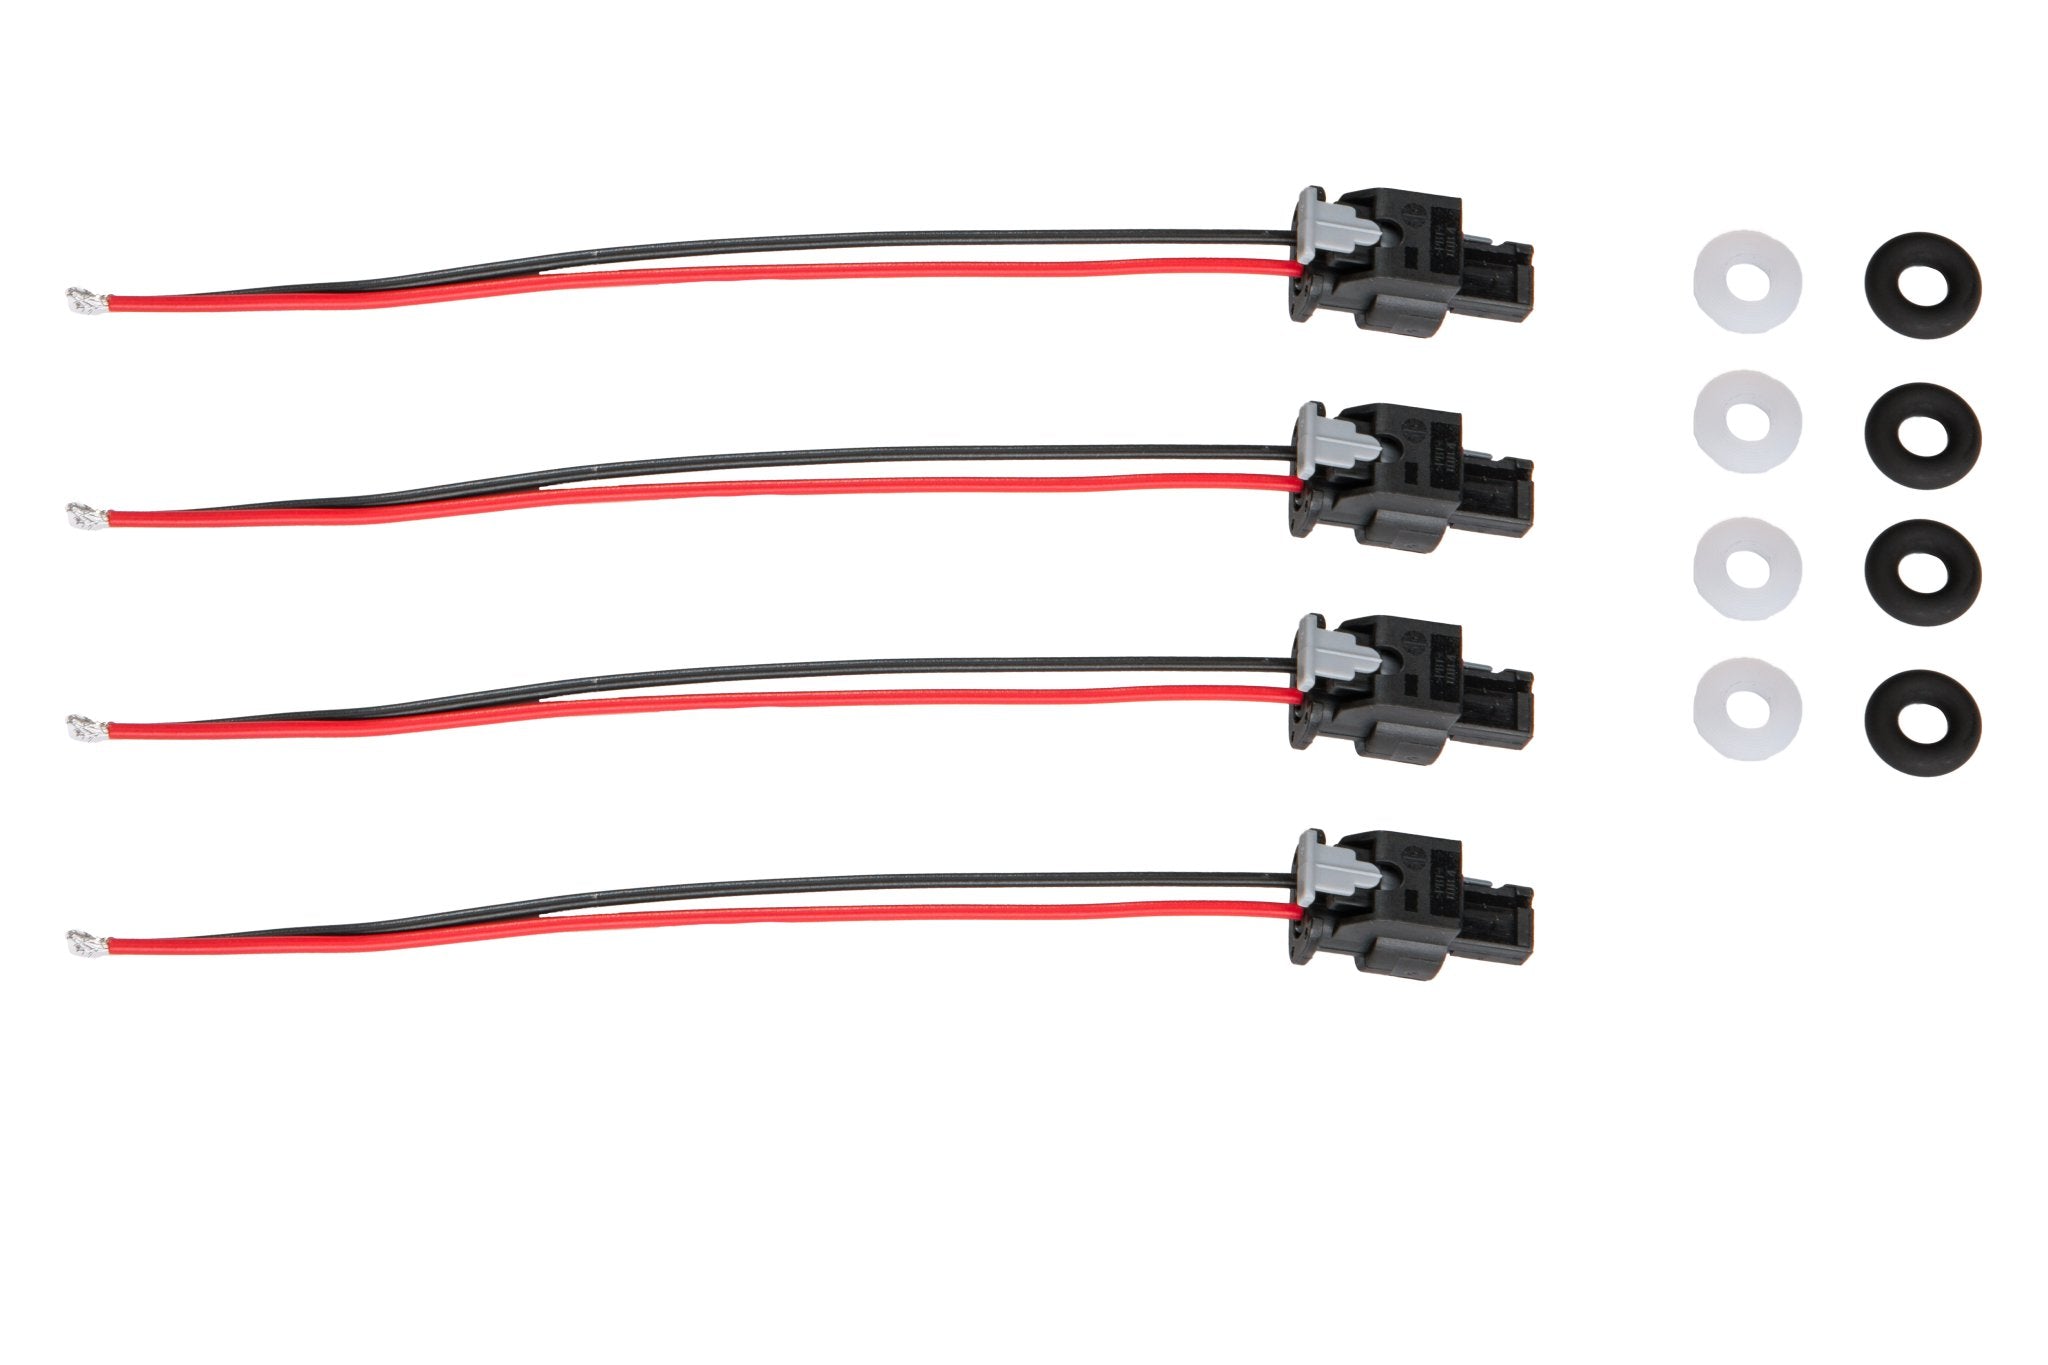 1.4 TSI EA111 - Spare Injectors Wiring Kit for 420hp Injectors - RTMG Performance